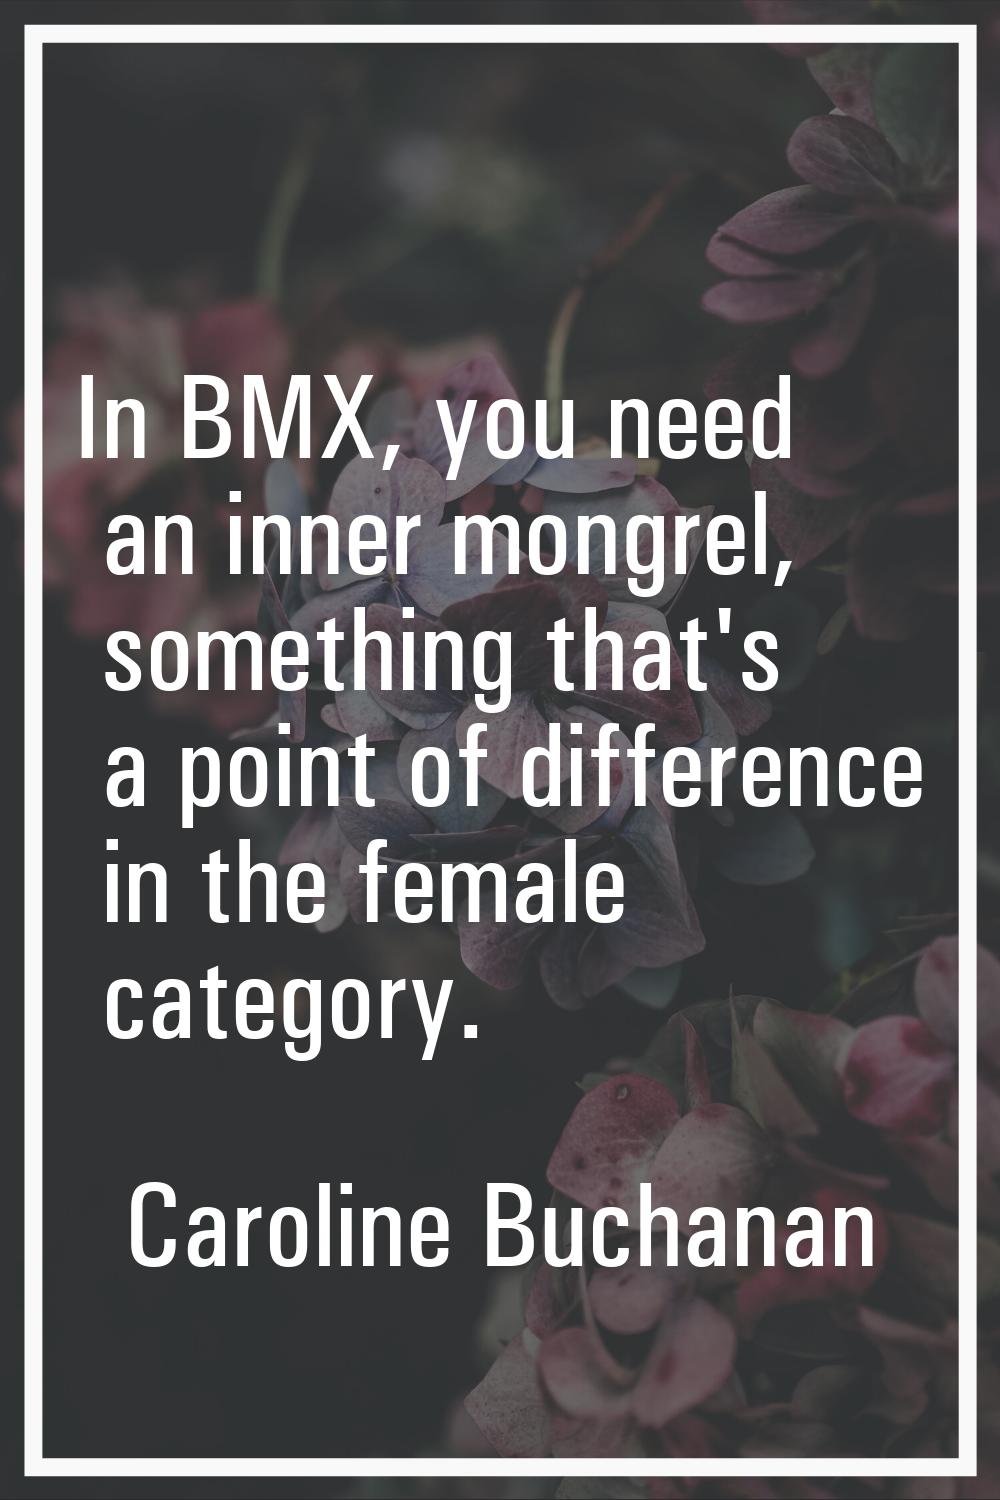 In BMX, you need an inner mongrel, something that's a point of difference in the female category.